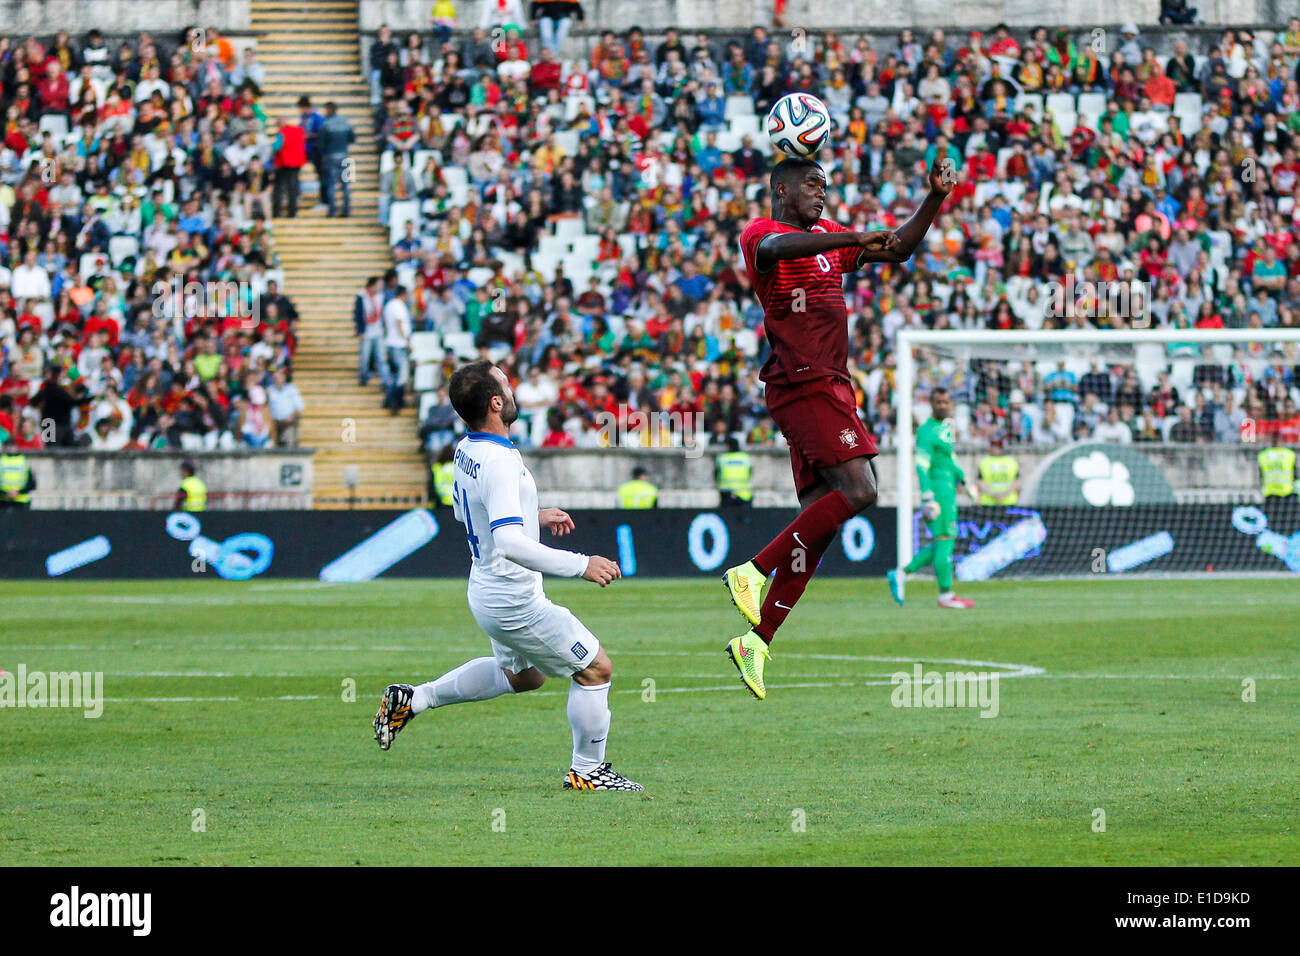 Lisbon, Porrtugal. 31st May, 2014. Portugal midfielder William Carvalho (6) heads the ball, during preparatory friendly match for the World Cup at the National Stadium in Lisbon, Portugal, Saturday, May 31, 2014. Credit:  Leonardo Mota/Alamy Live News Stock Photo